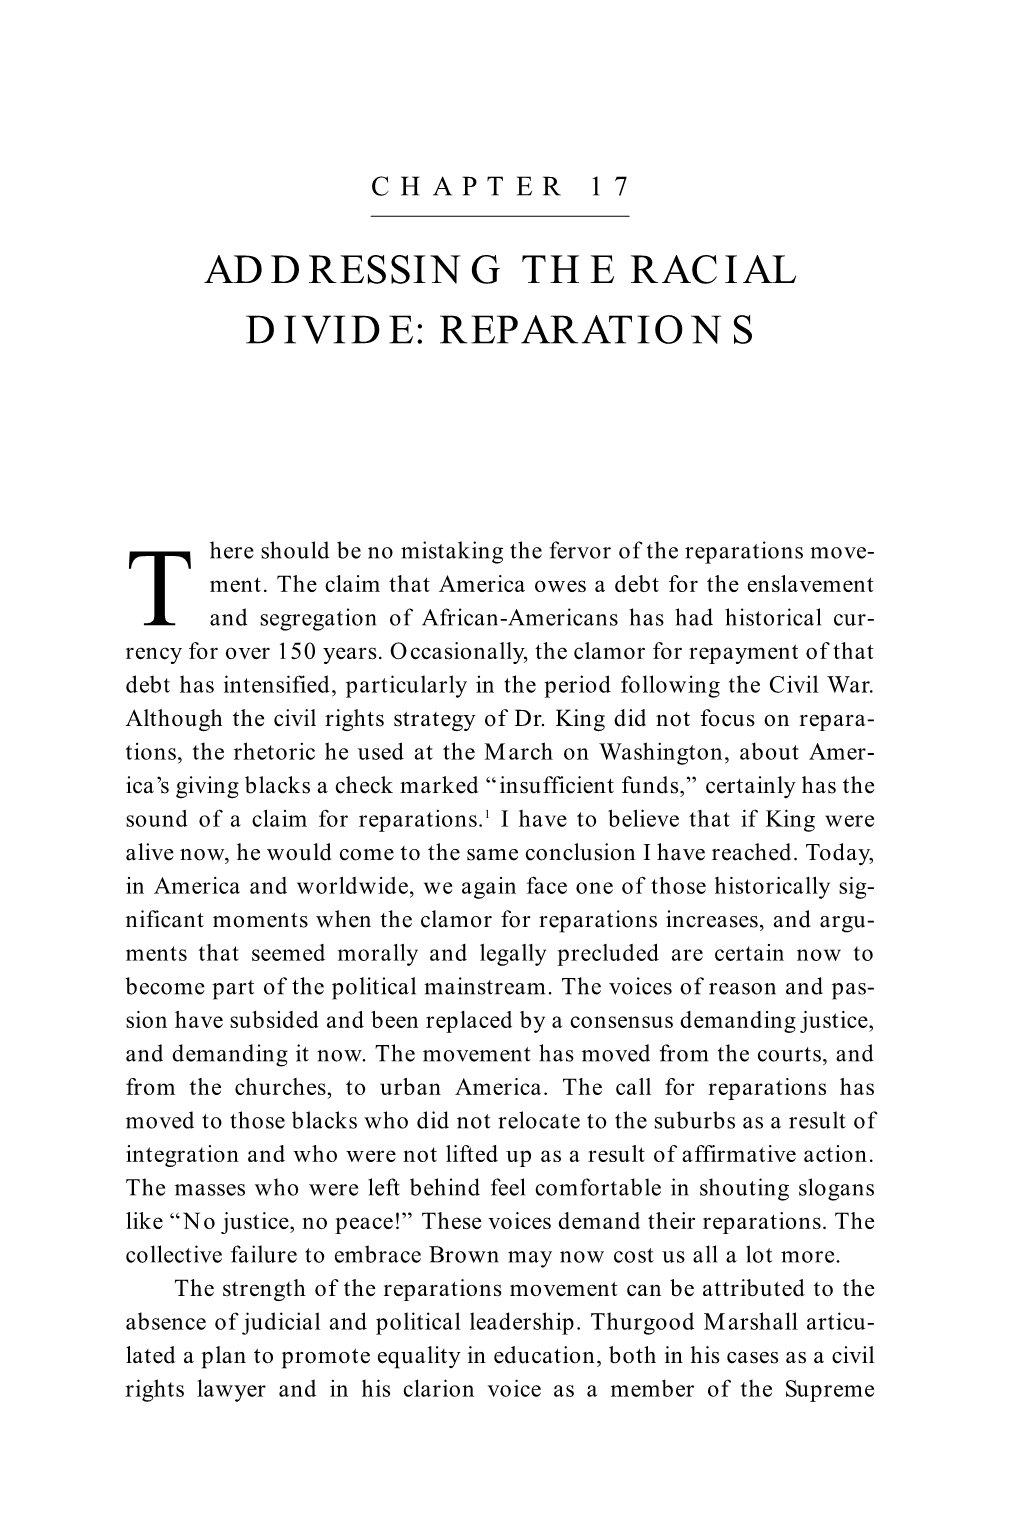 Addressing the Racial Divide: Reparations